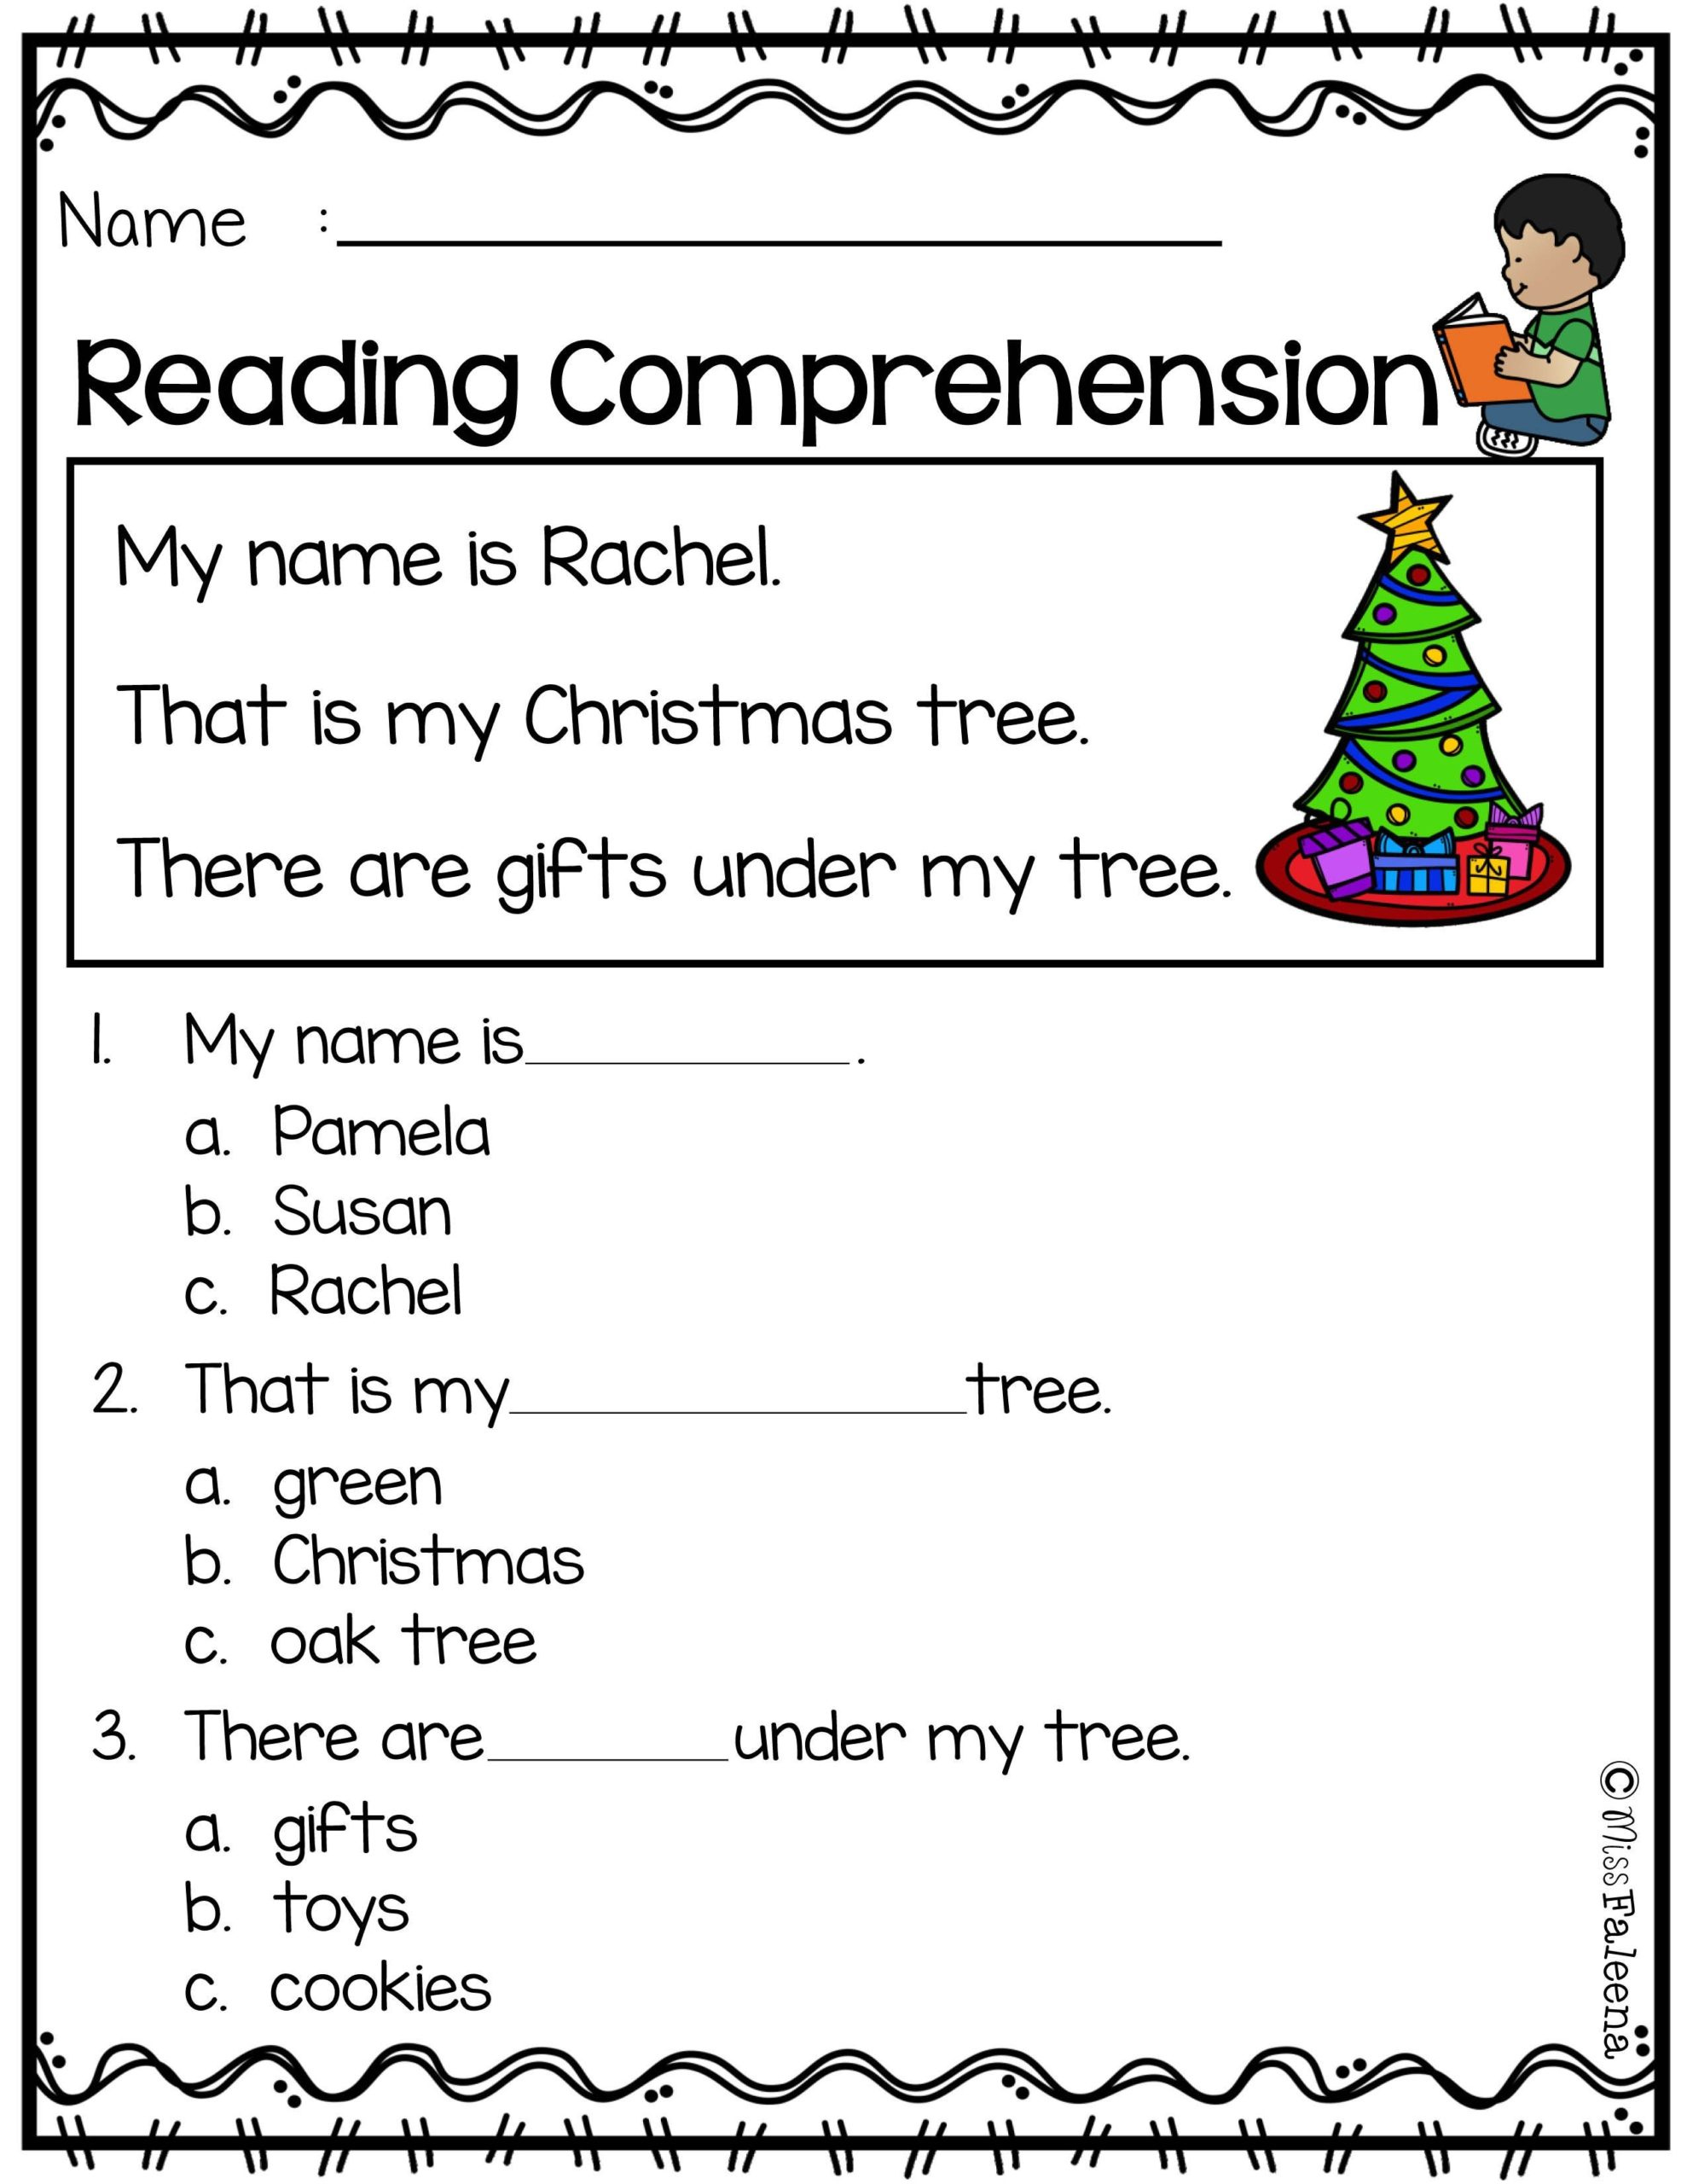 Free Printable Reading Comprehension Worksheets For 3Rd Grade Reading 